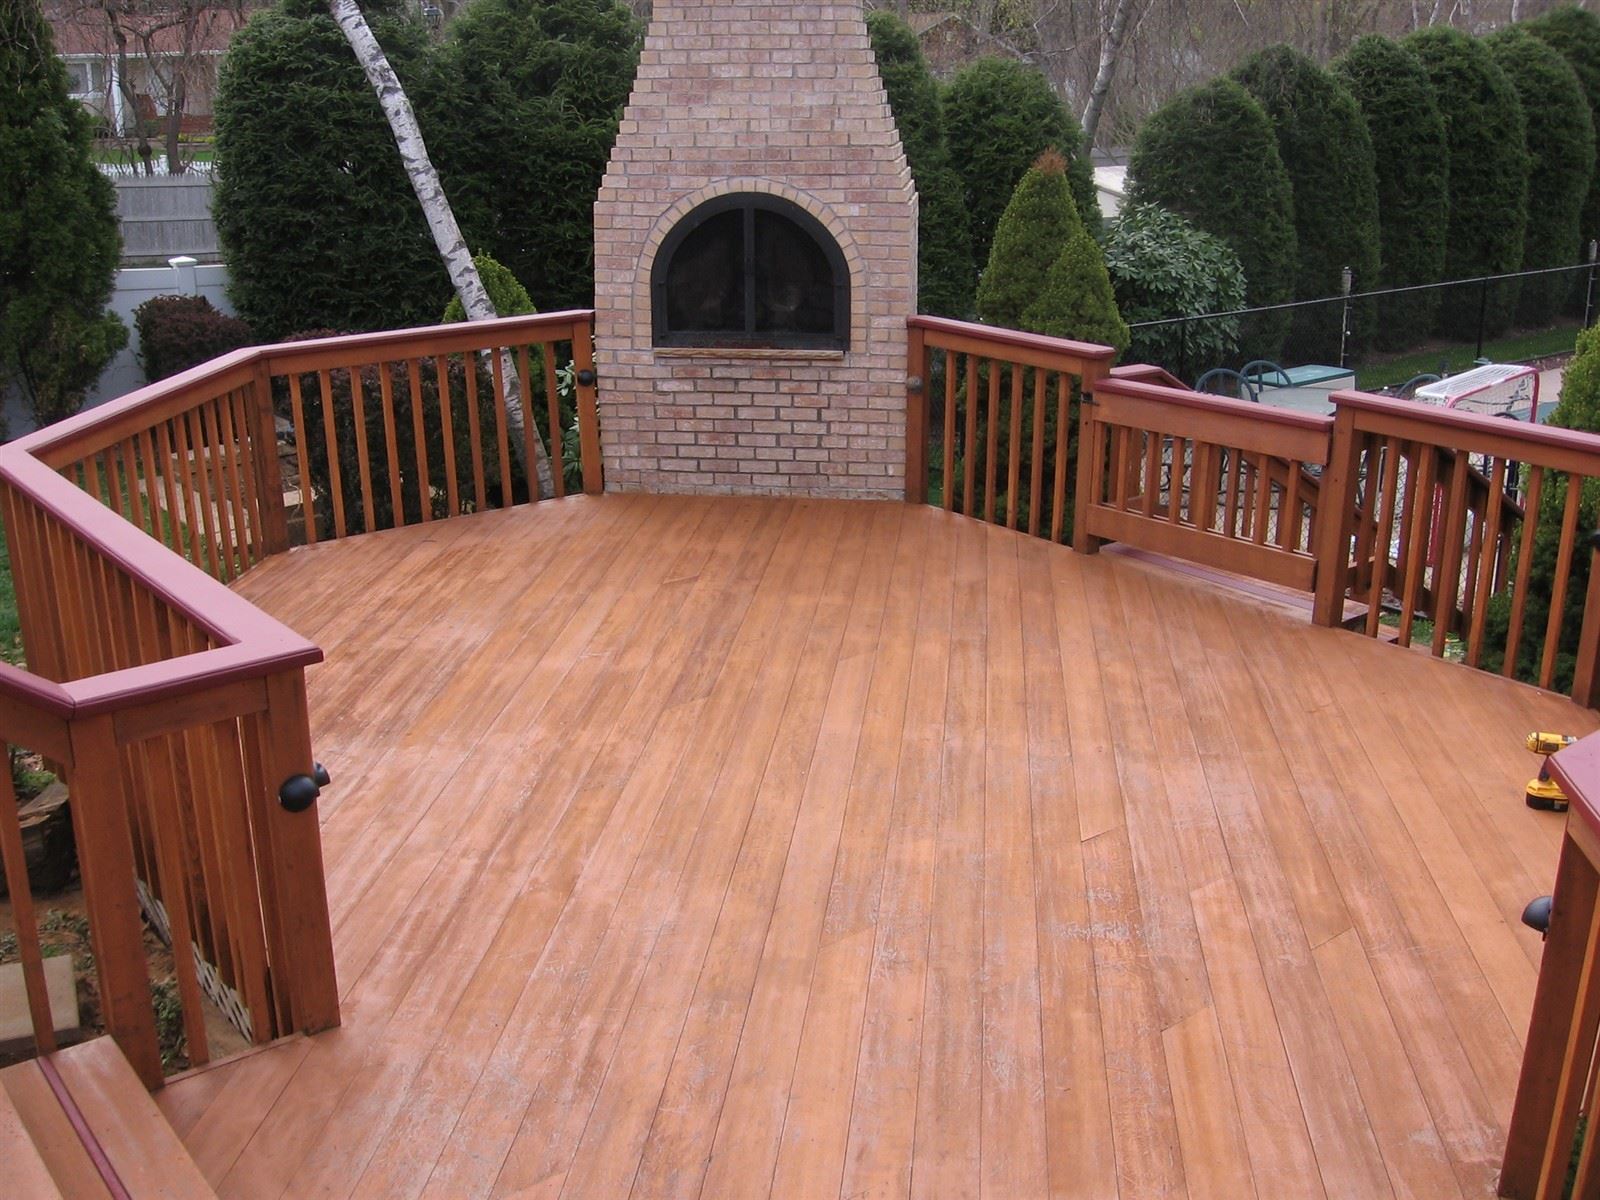 After staining with Sherwin-Williams Cedar Bark